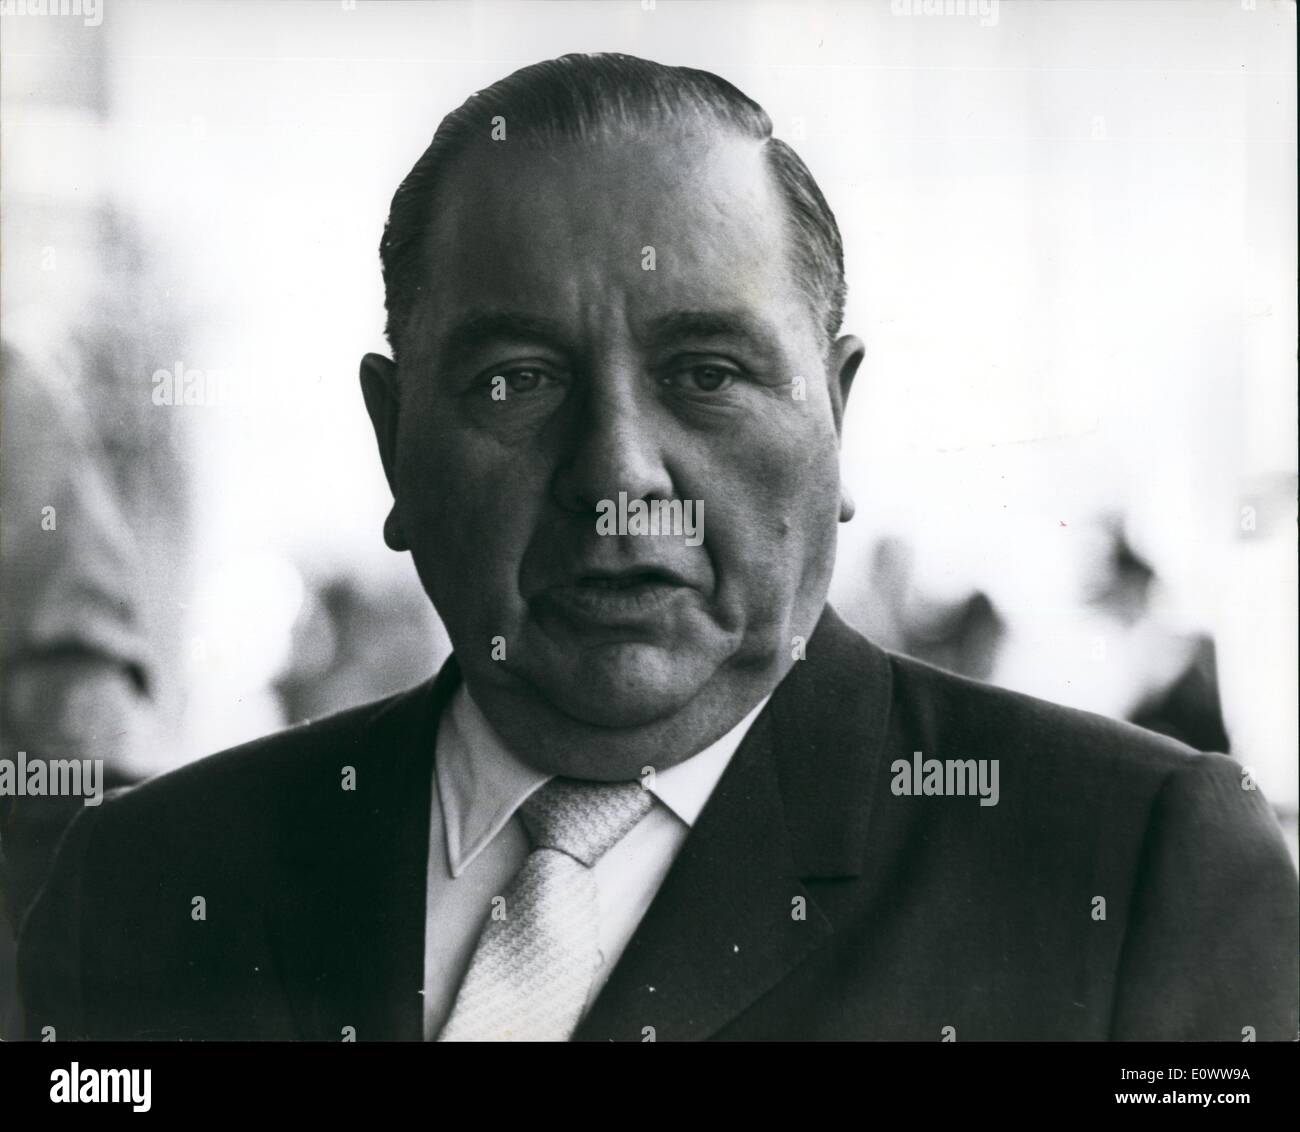 May 05, 1964 - Mayor Of Chicago In London: Mr. Richard Daley, Mayor of Chicago, U.S.A. is in London on a visit. Photo shows A portrait of Mr. Daley in London yesterday. Stock Photo